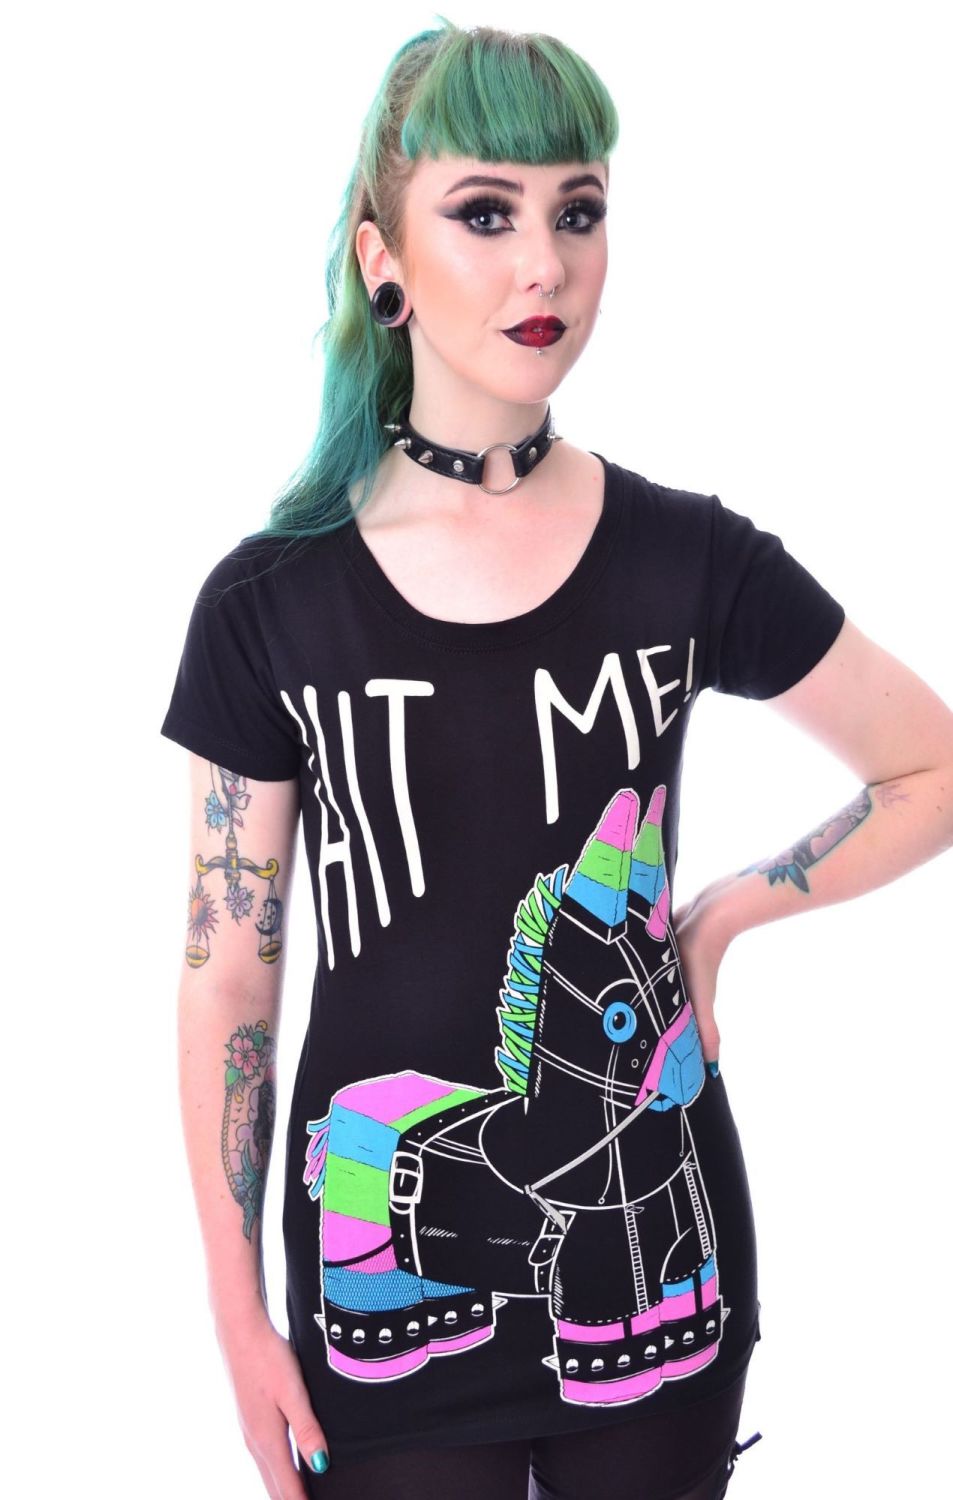 Hit me t-shirt by Cupcake cult